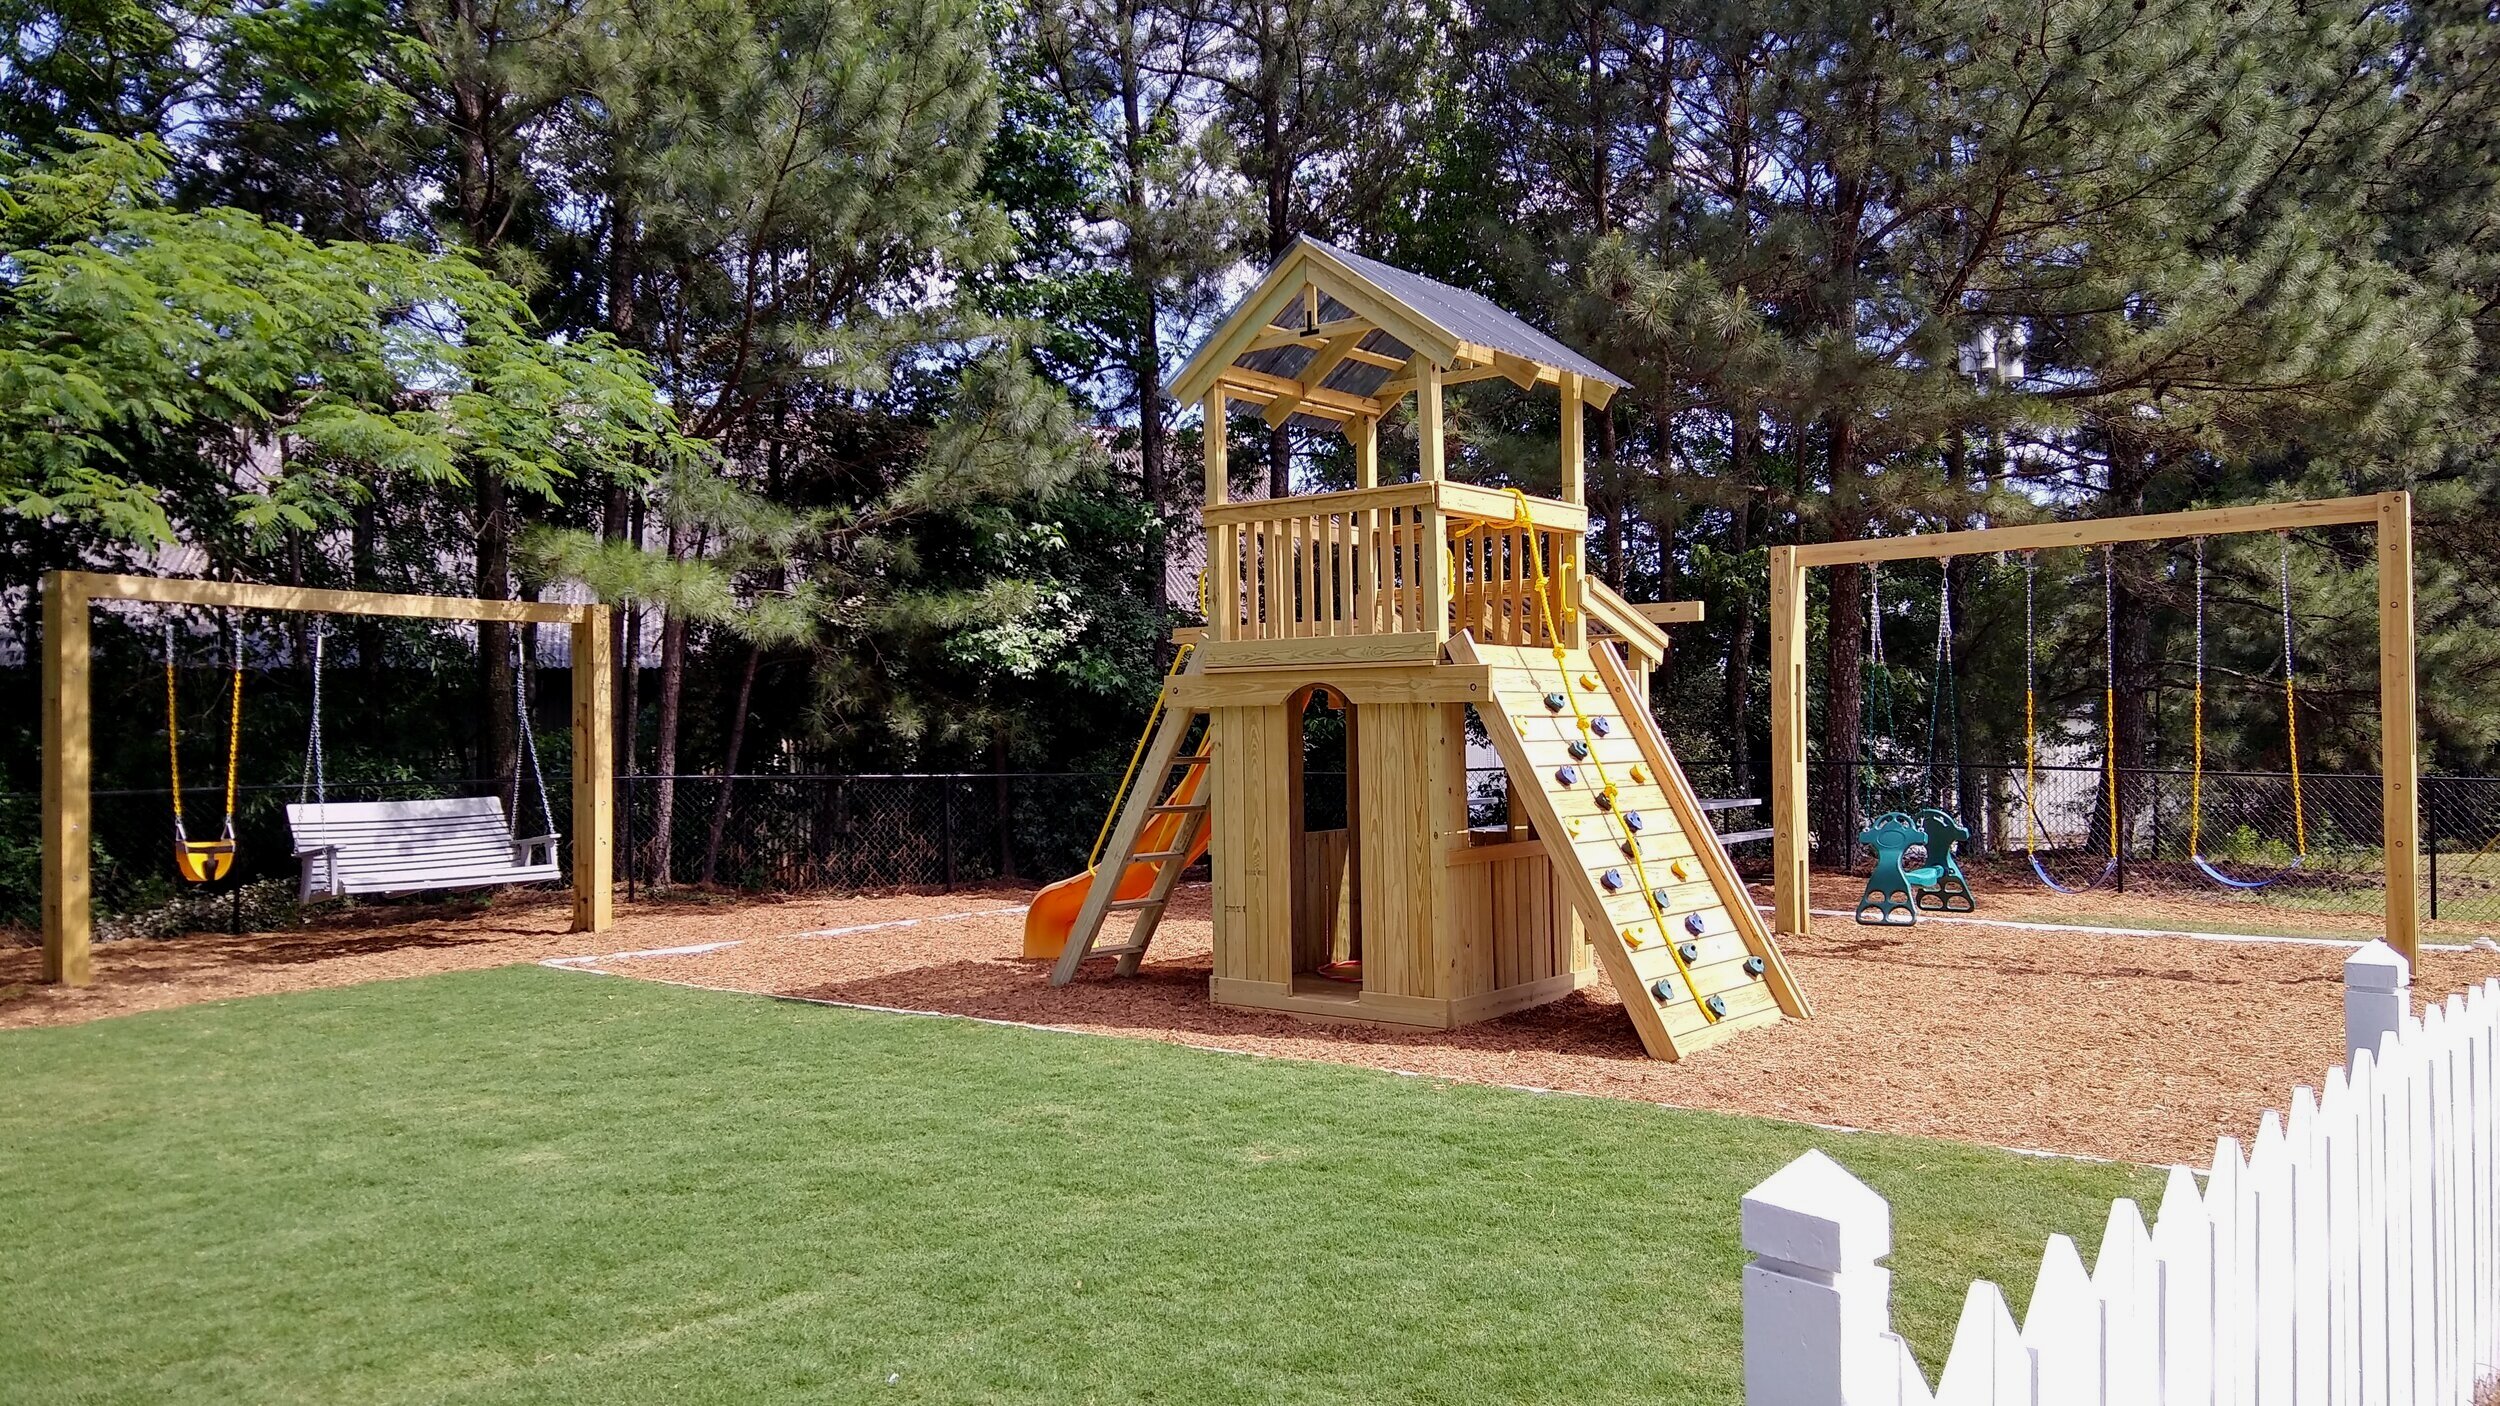 Our brand new playground is just as much fun!